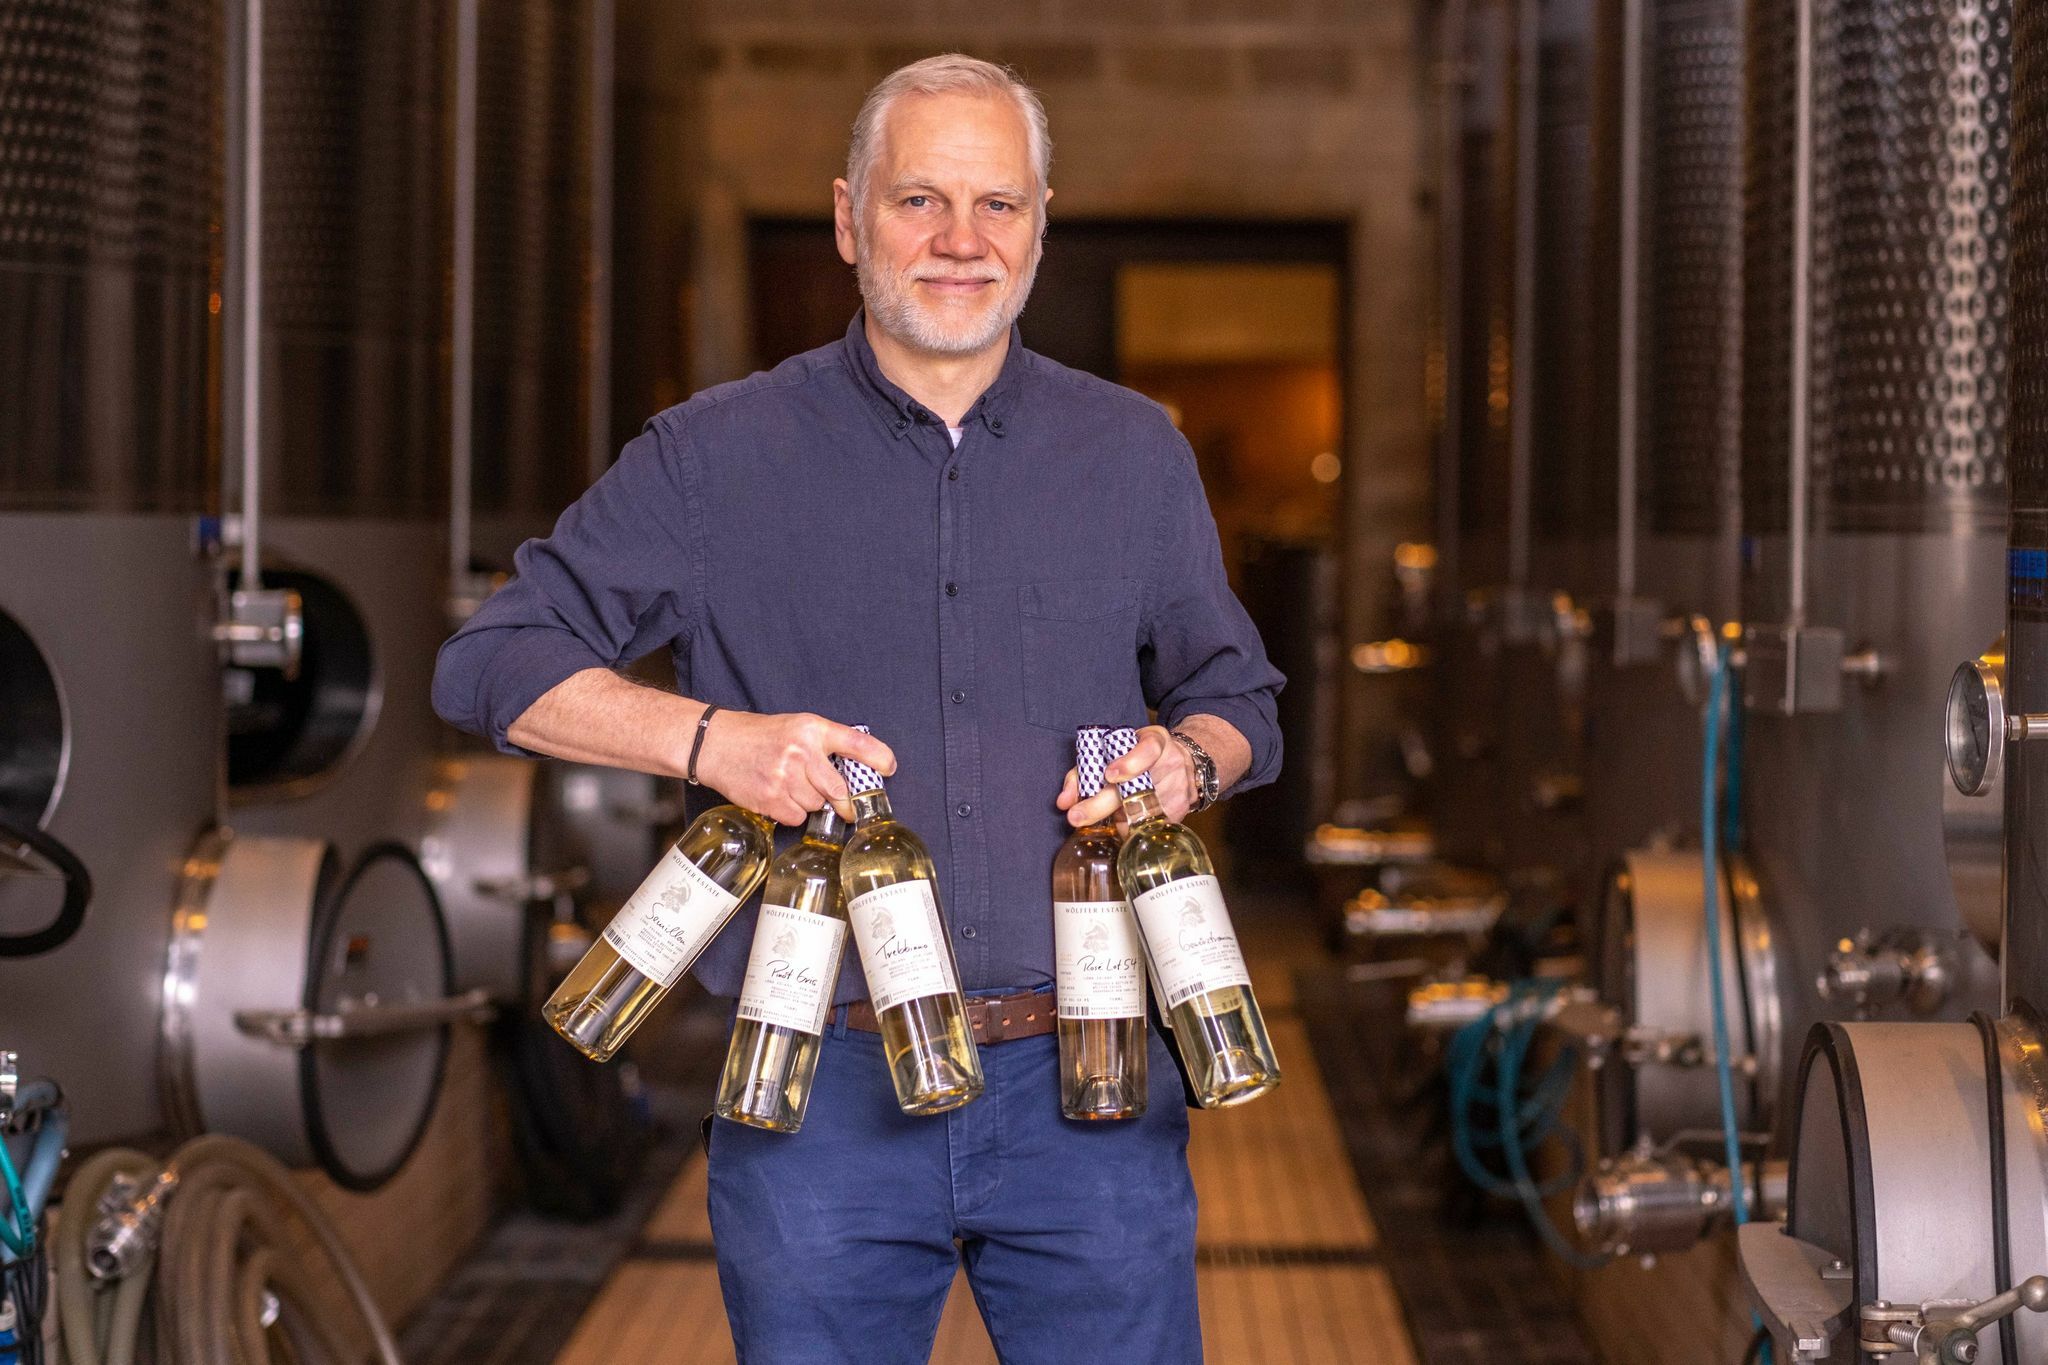 Wölffer Estate Vineyard's winemaker Roman Roth with the Cellar Series collection of small batch releases of artisanal wines.